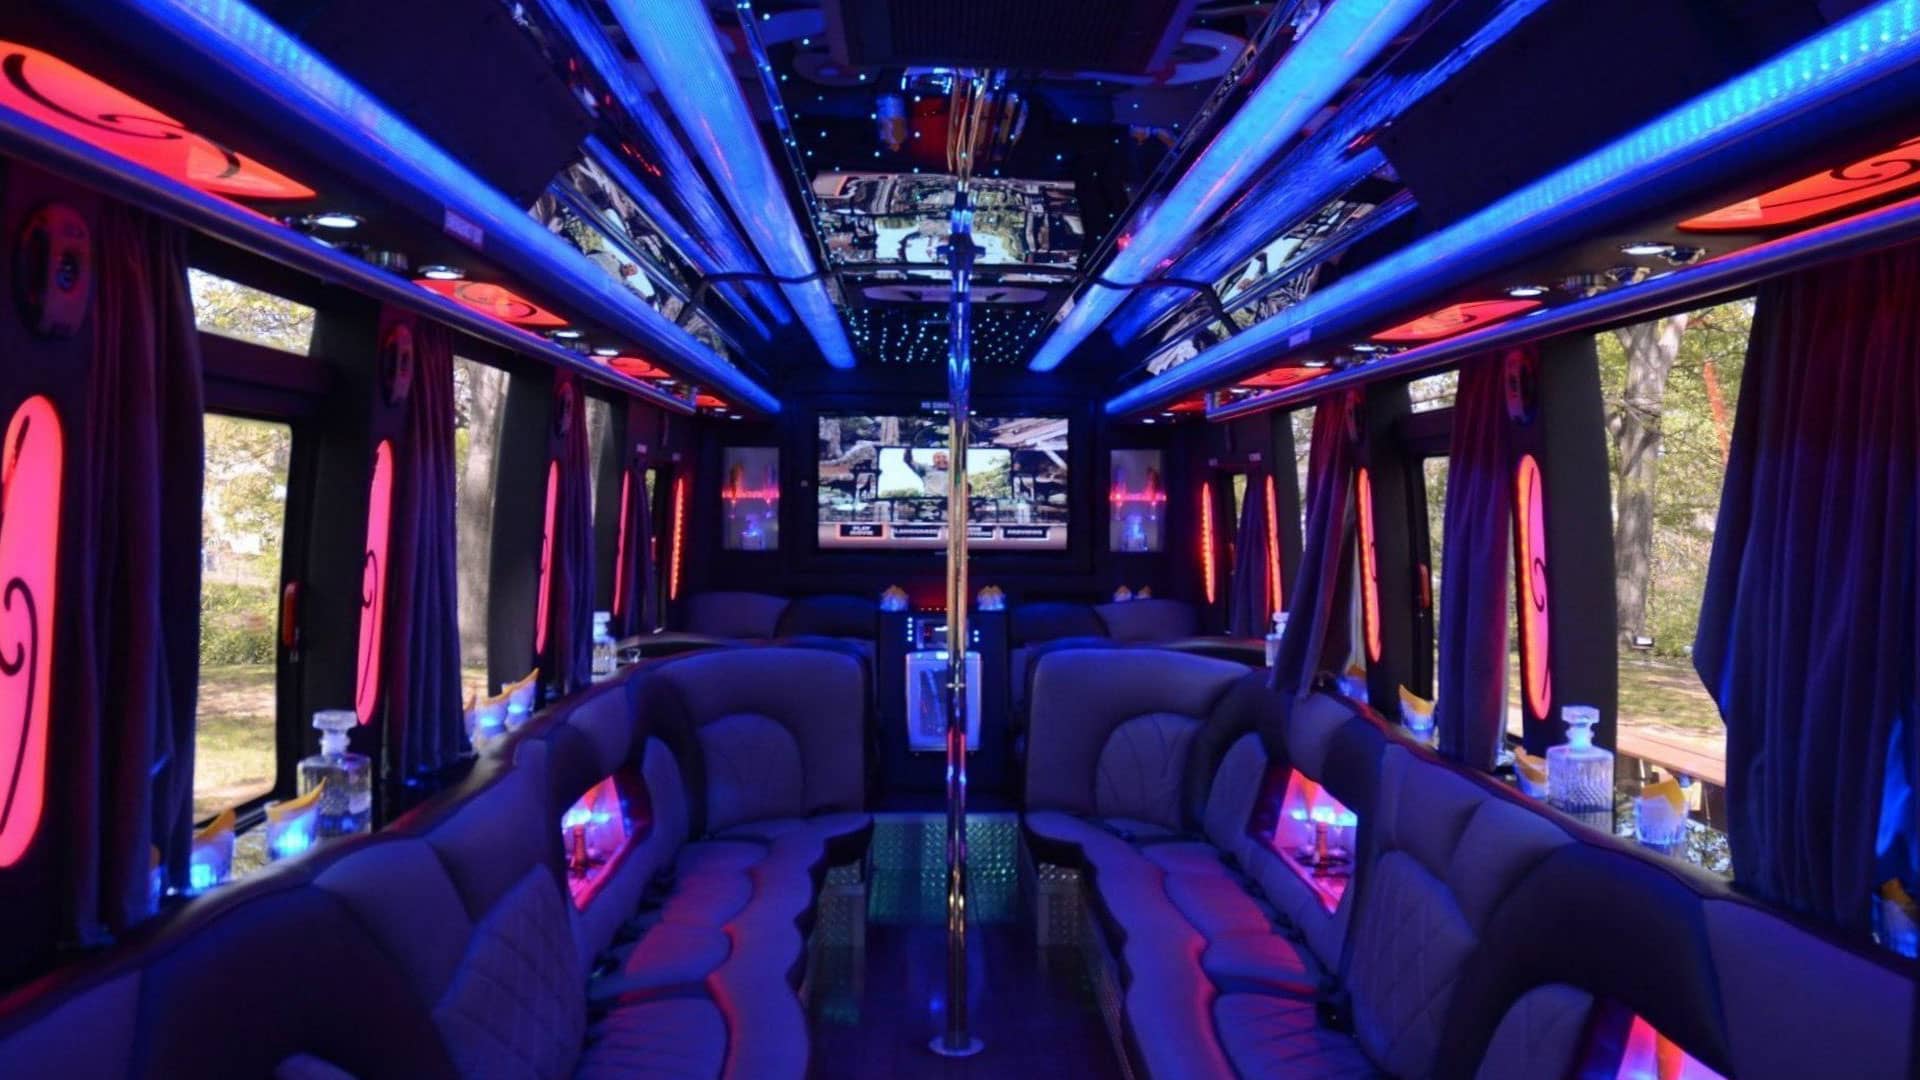 How to Make the Most of Your Party Bus Rental